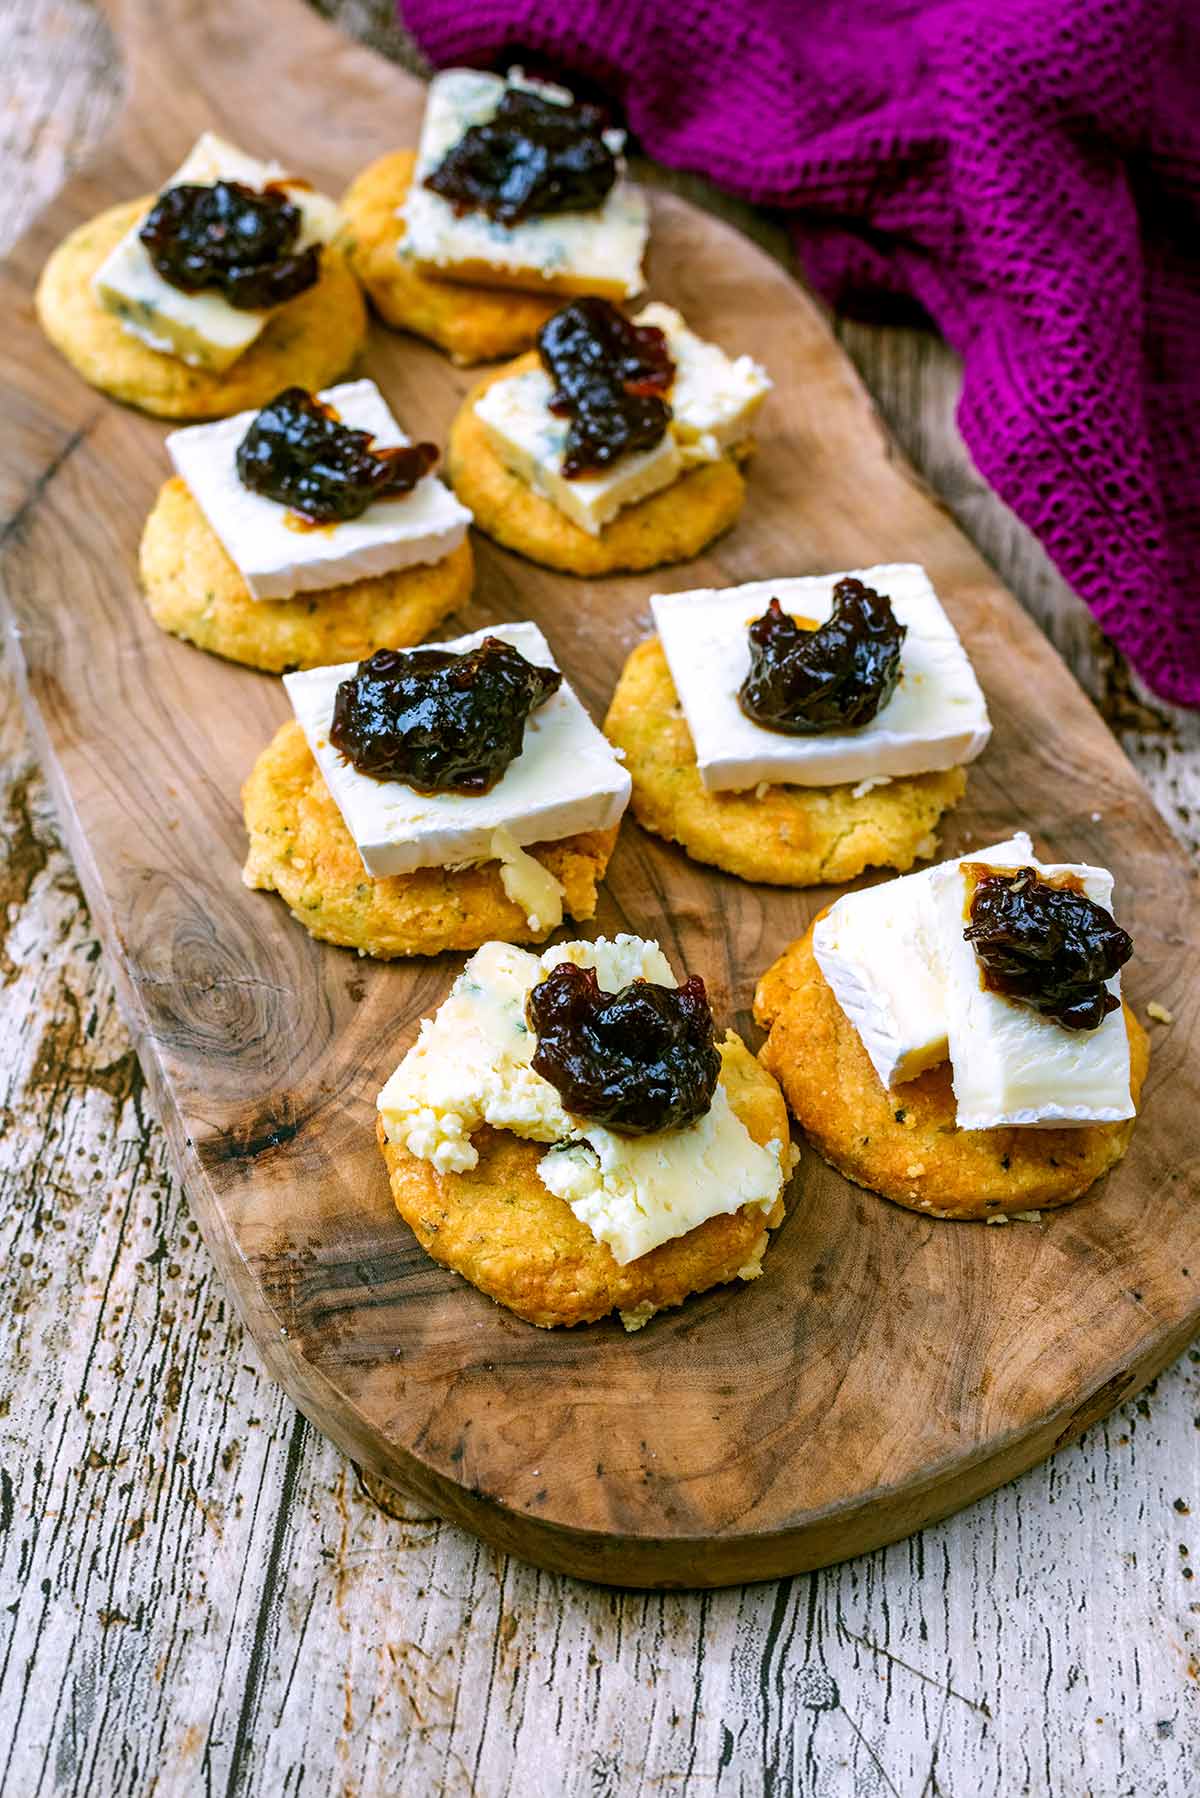 Eight biscuits each topped with cheese and chutney.